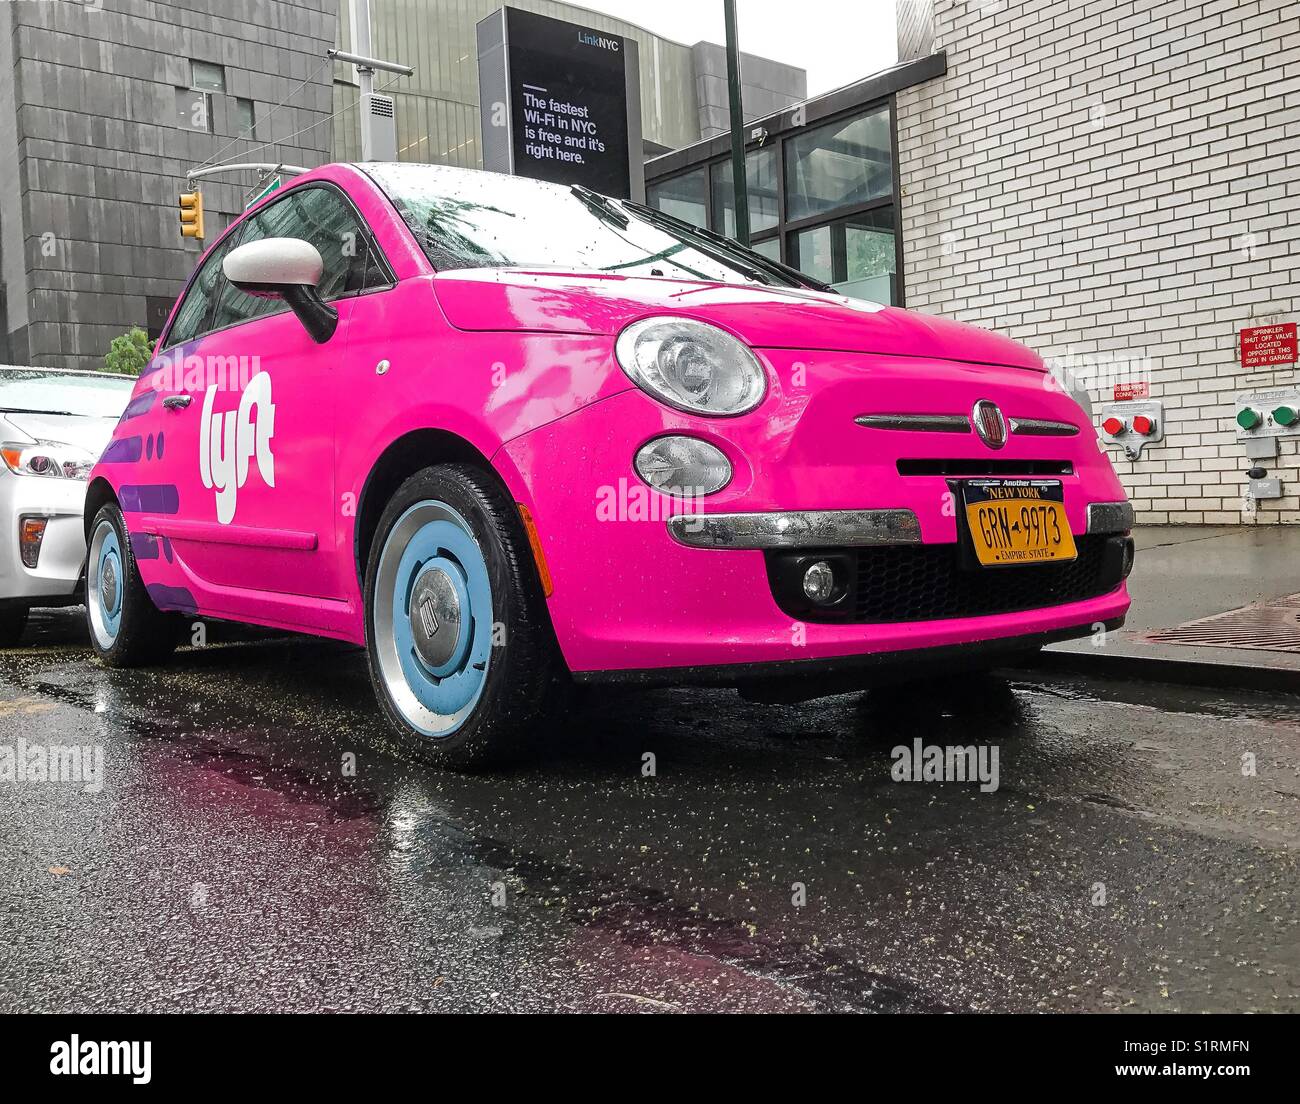 Fiat 500 painted pink and carrying a Lyft logo is parked in the streets of Manhattan. Stock Photo